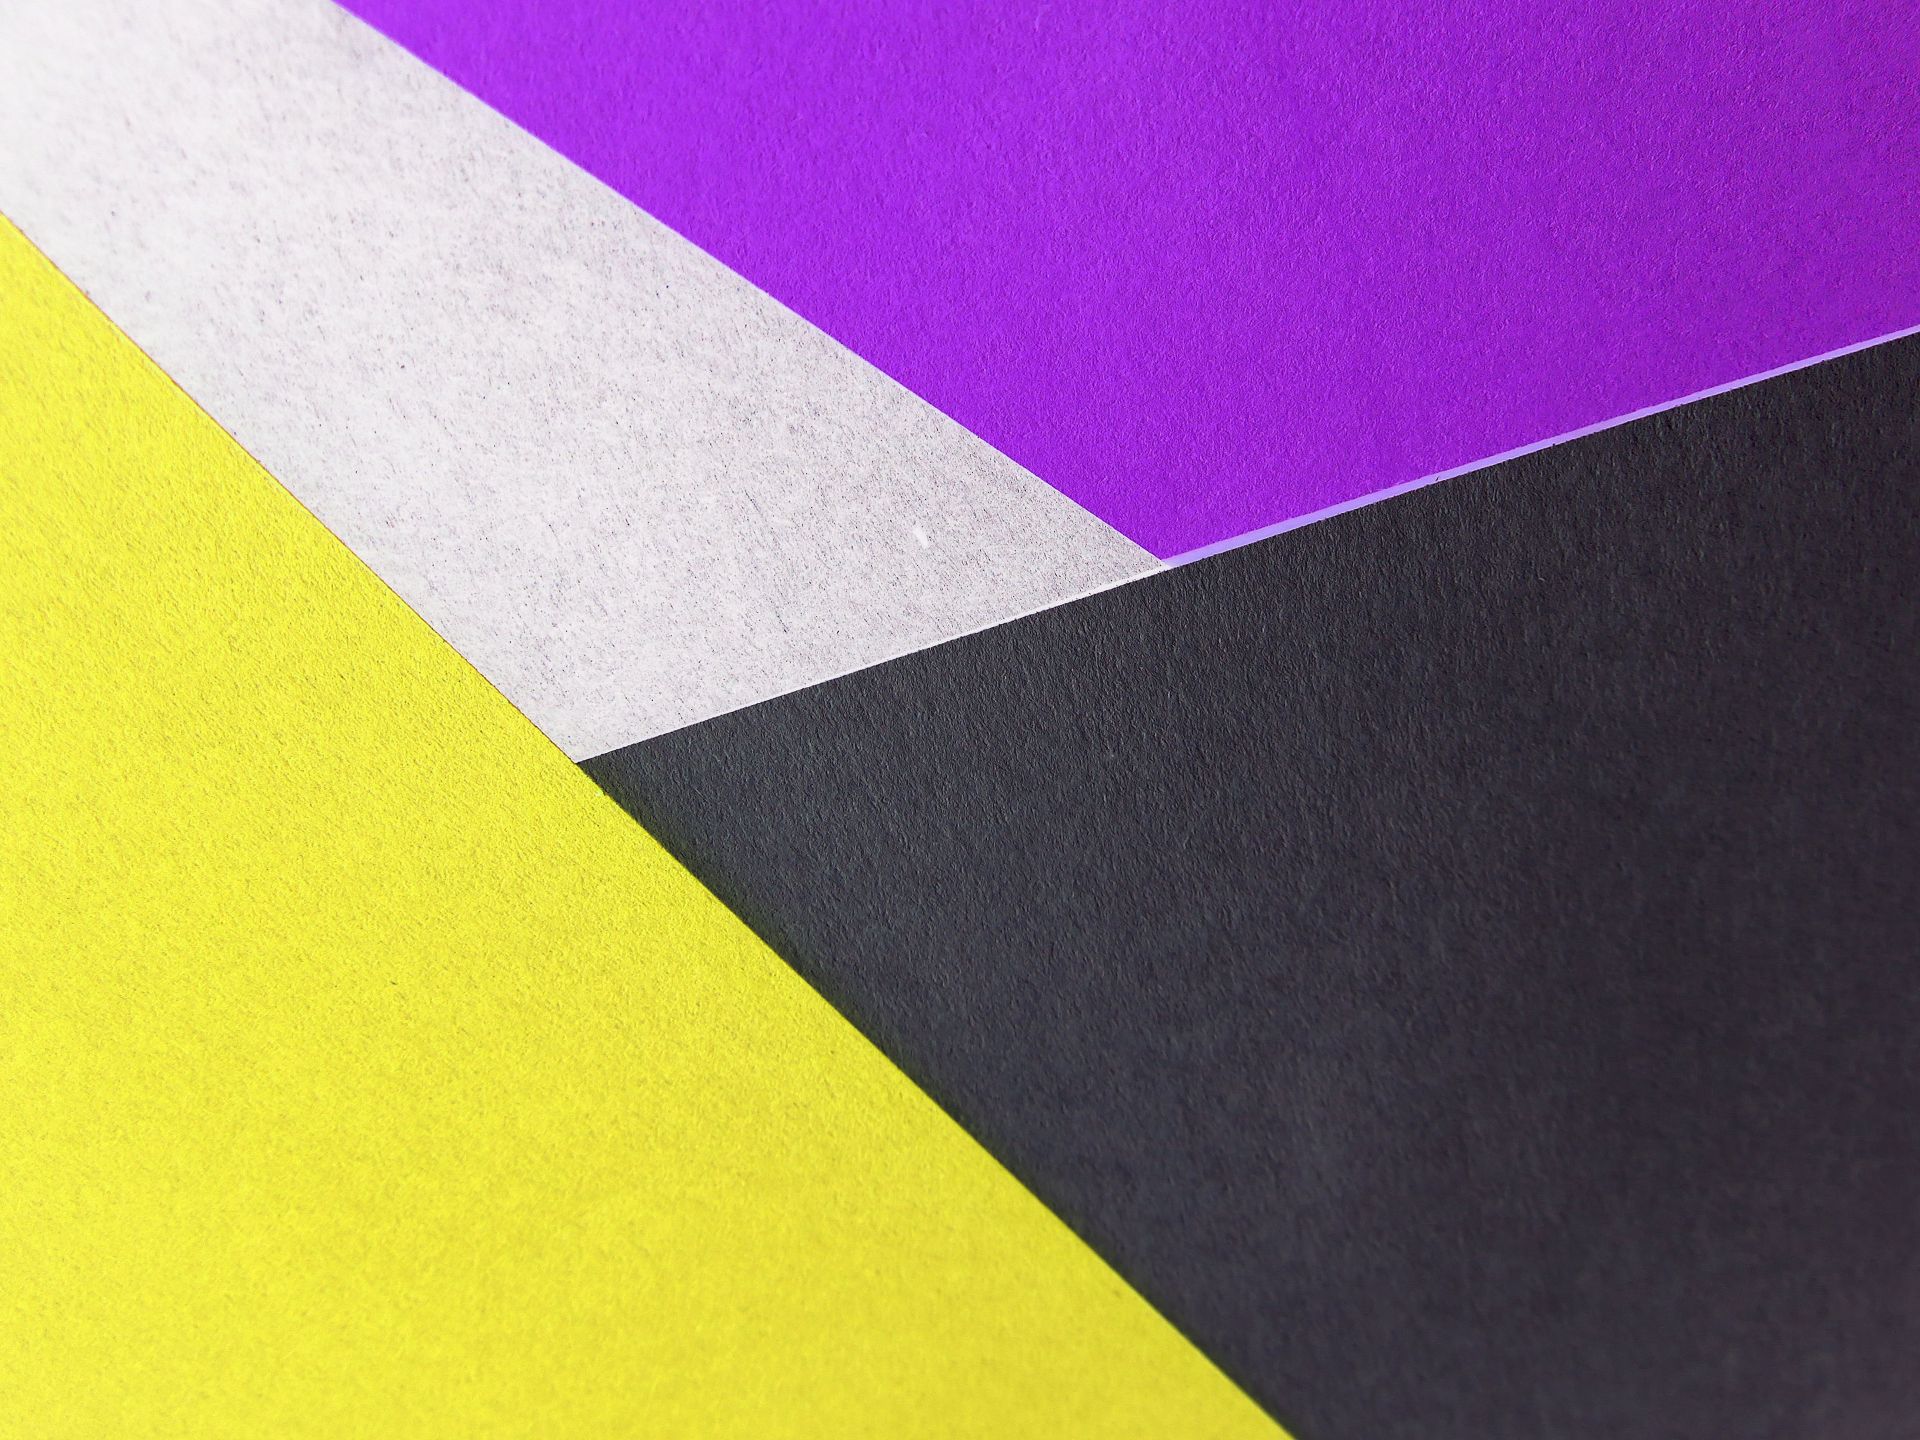 Yellow, Black and Purple Colored Papers